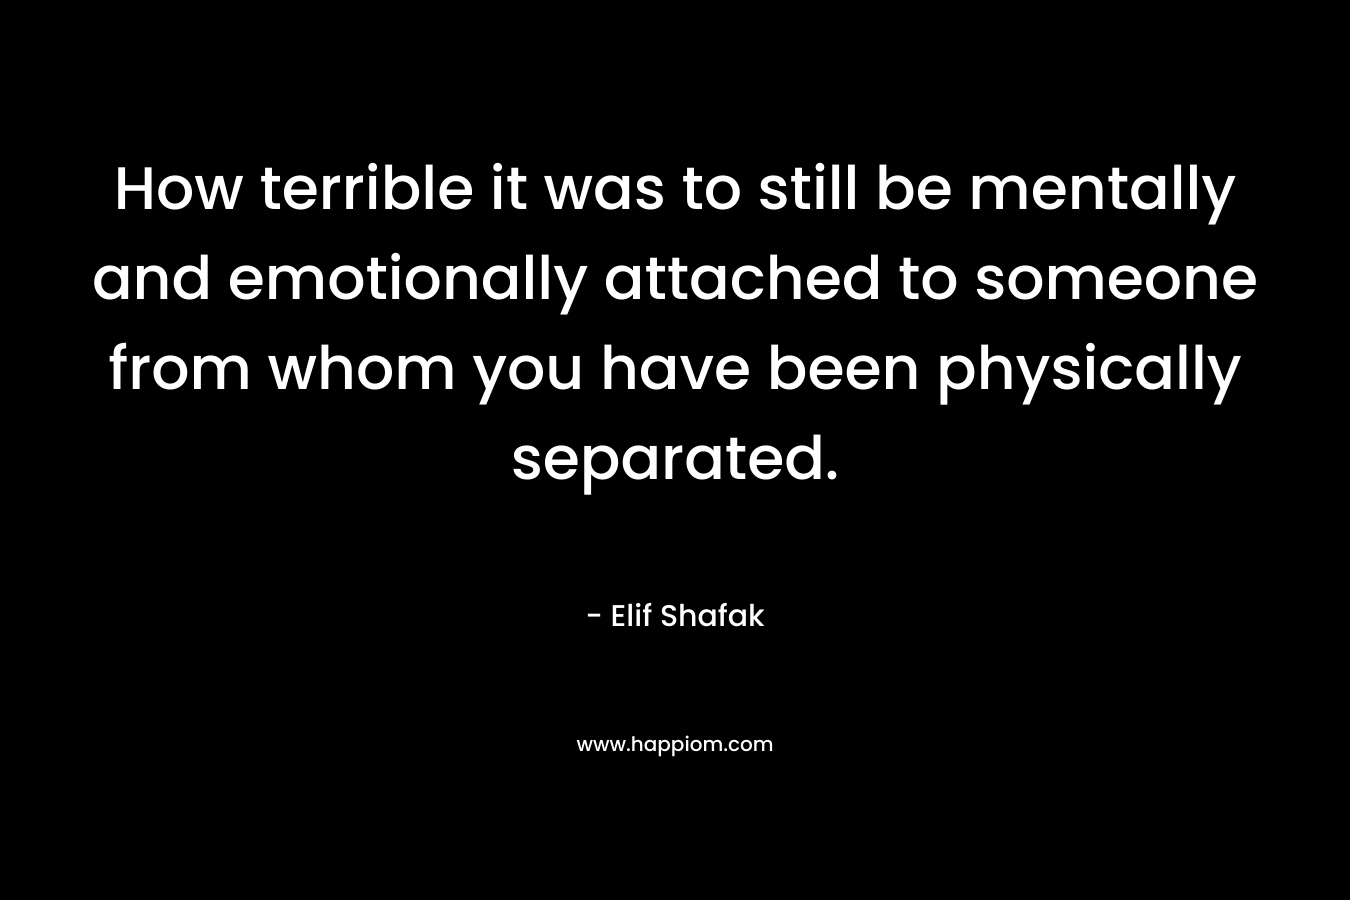 How terrible it was to still be mentally and emotionally attached to someone from whom you have been physically separated. – Elif Shafak